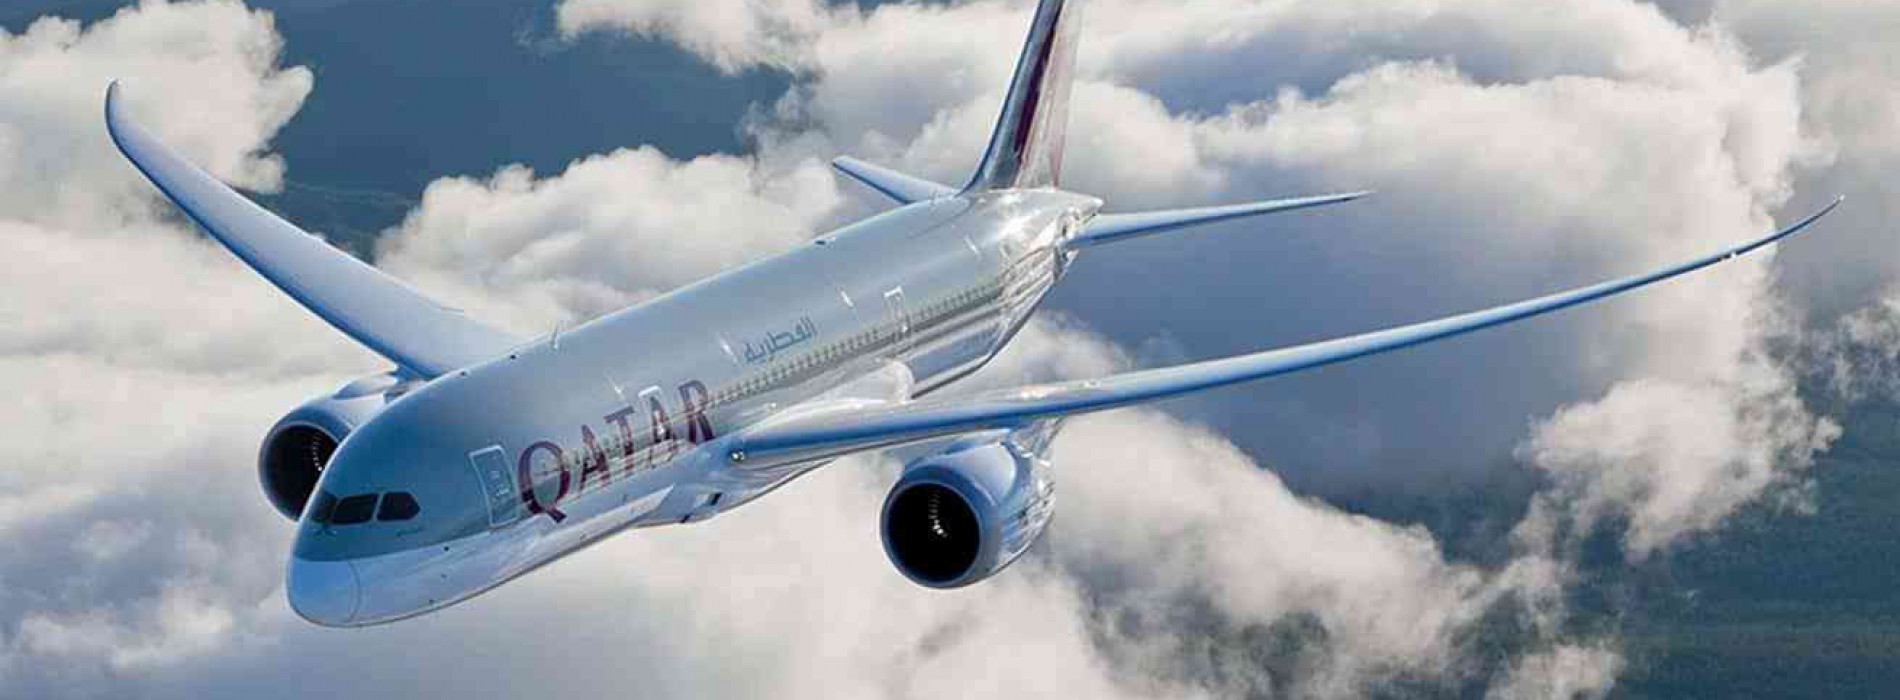 Qatar Airways to soon apply for launch of Indian airline, says CEO